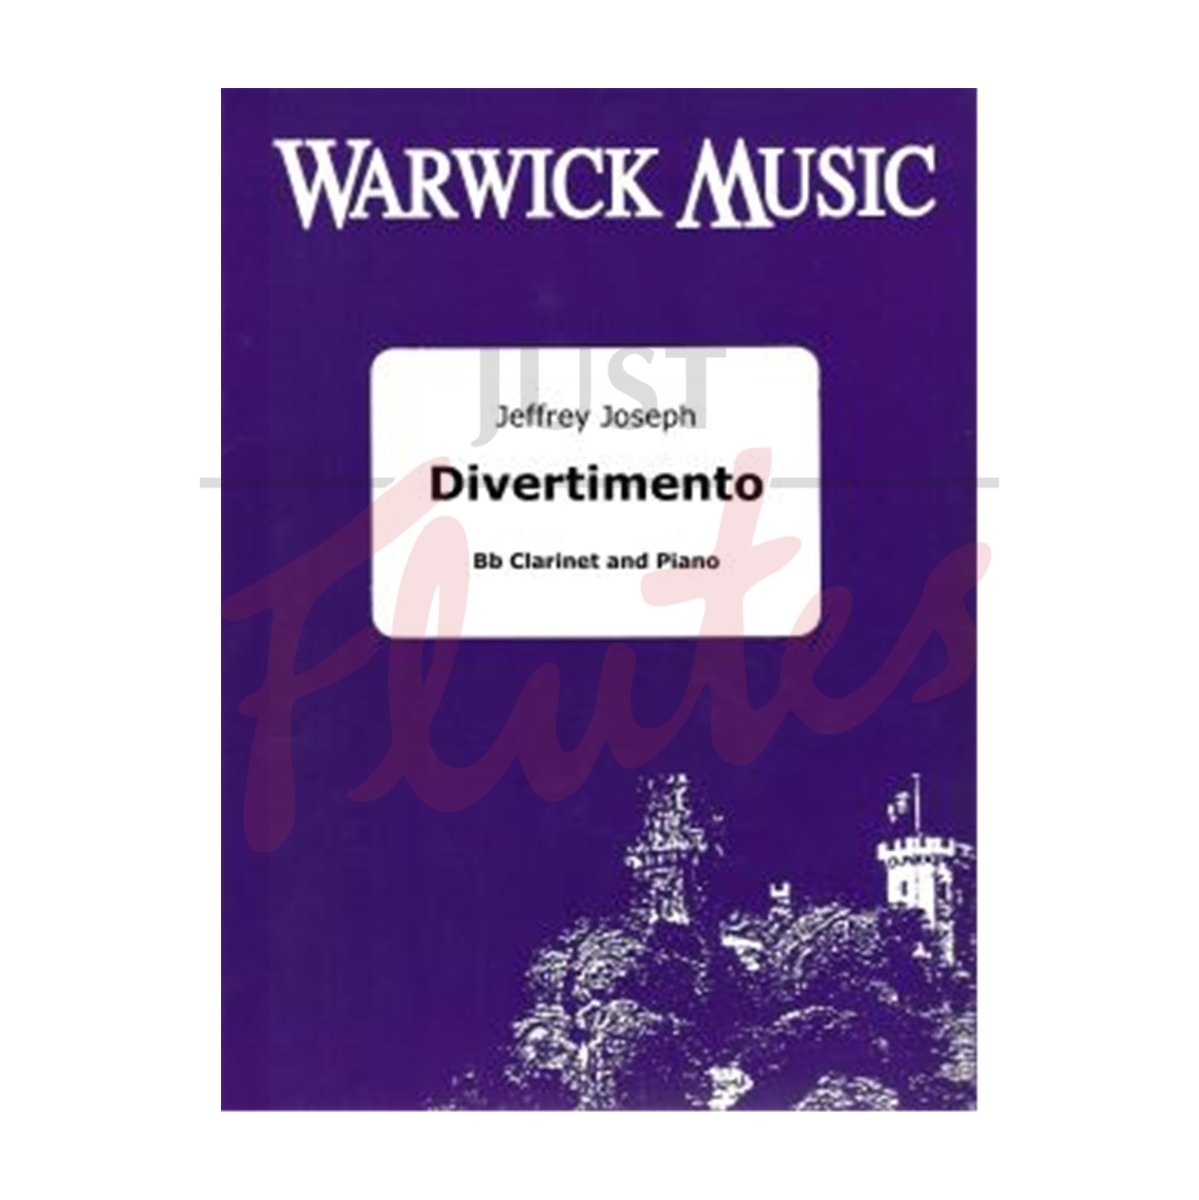 Divertimento for Clarinet and Piano